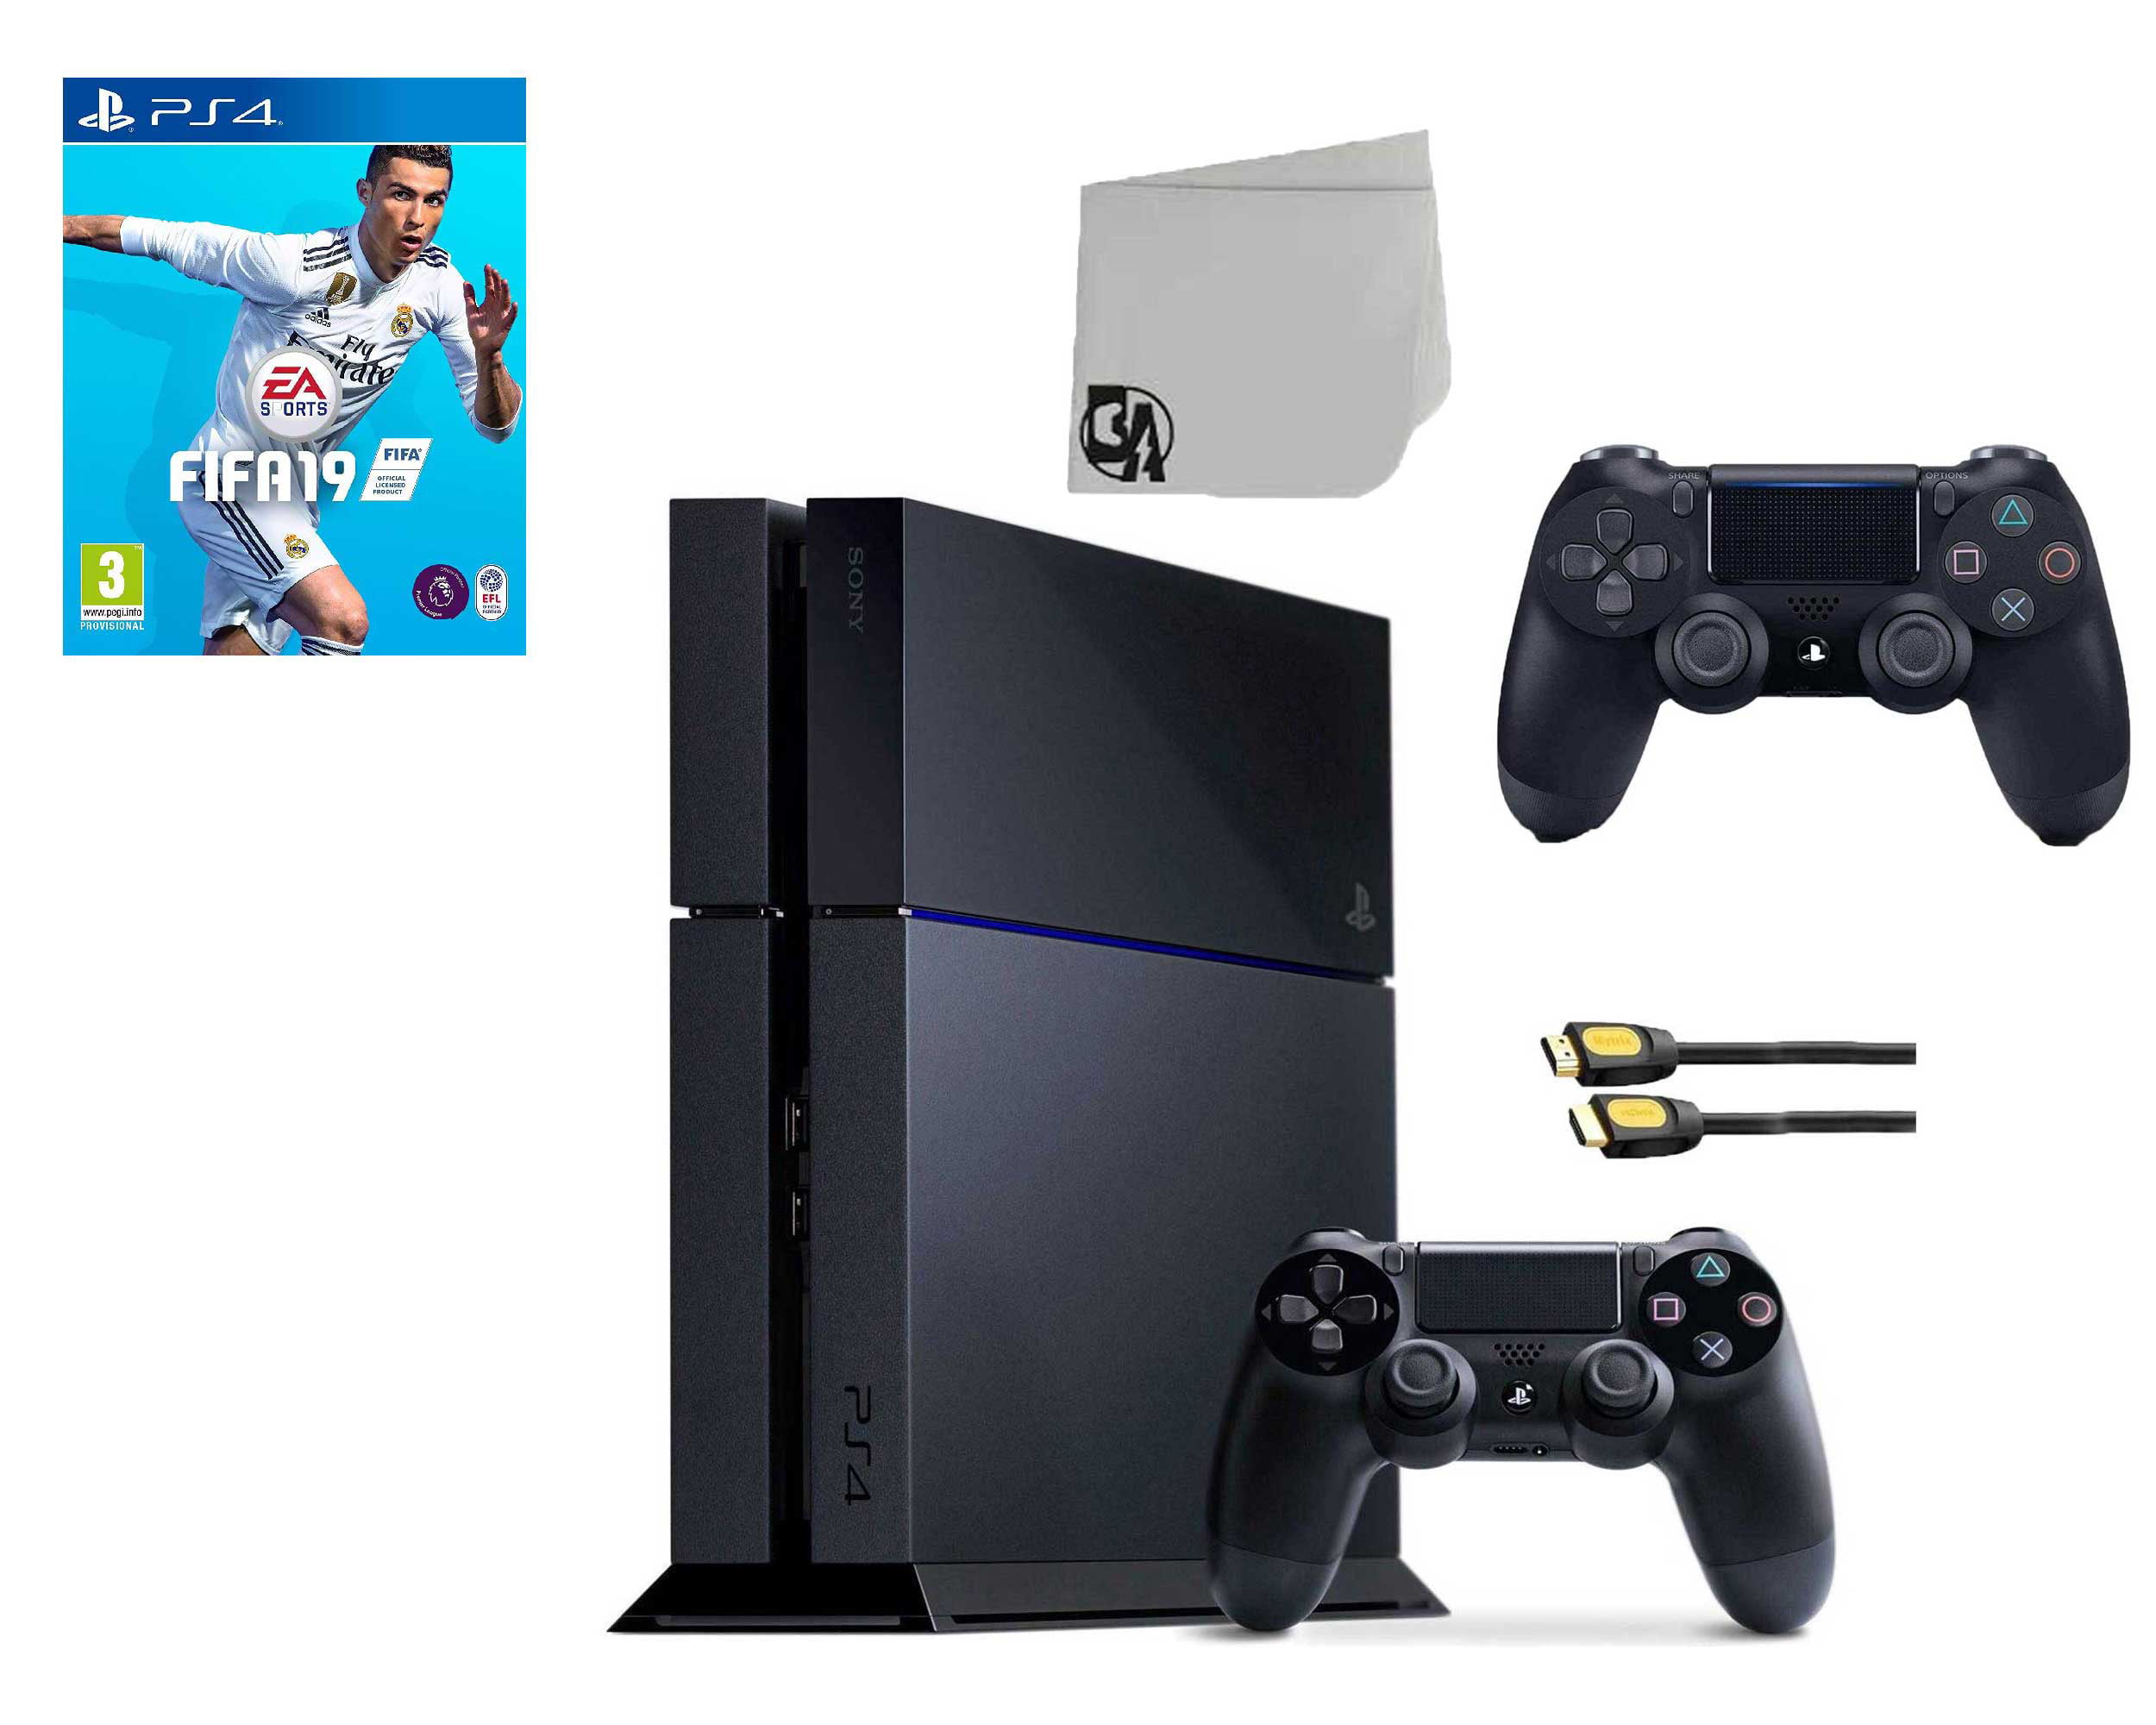 Sony PlayStation 4 500GB Gaming Console Black 2 Controller Included with Red Dead Redemption 2 BOLT AXTION Bundle - Walmart.com